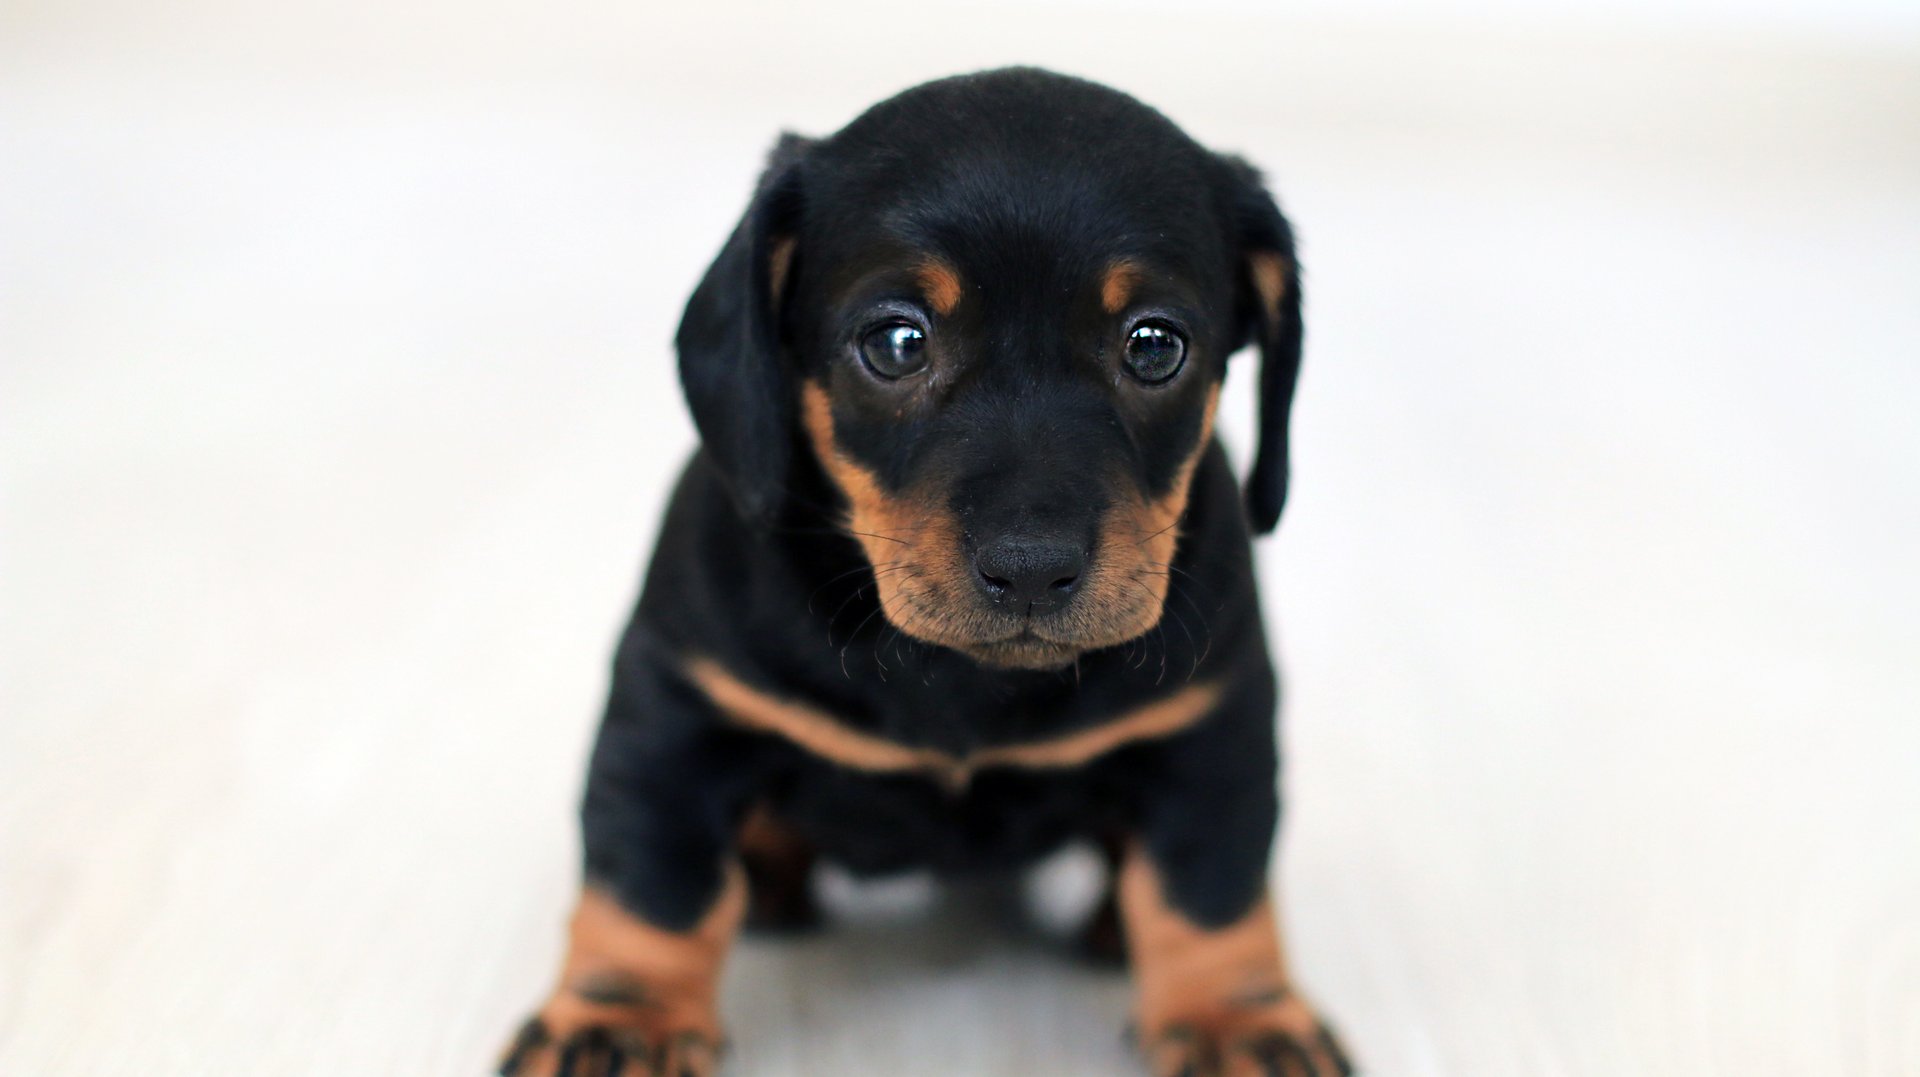 https://www.pawtracks.com/wp-content/uploads/sites/2/2020/10/black-and-tan-puppy.jpg?p=1